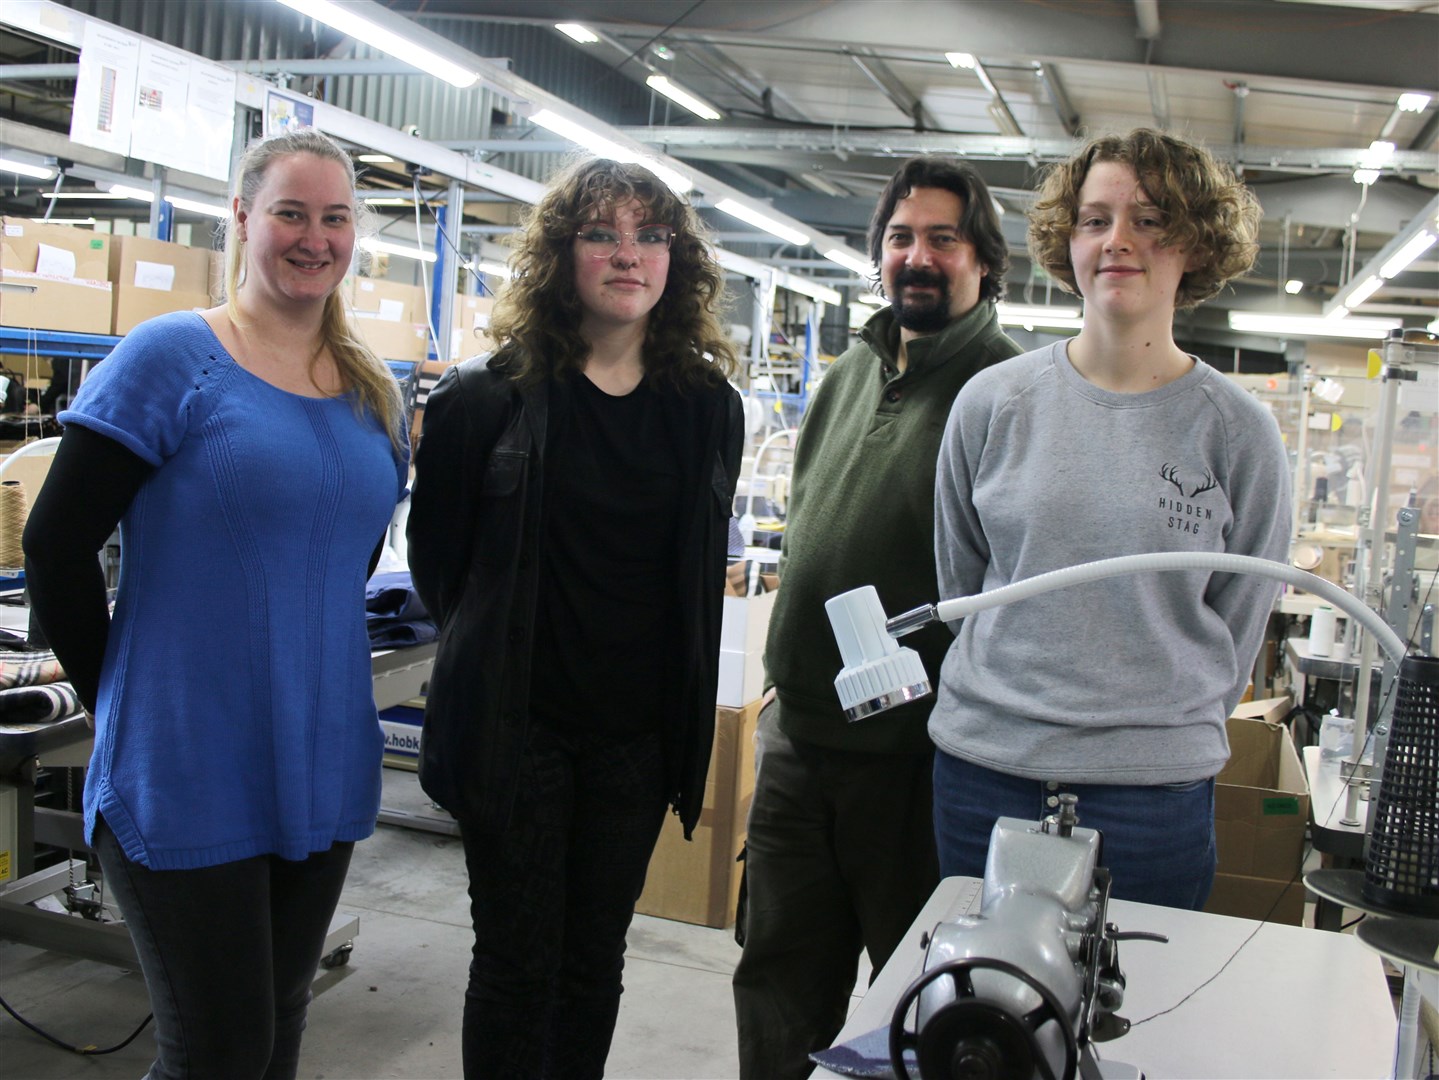 Hannah Clay (lecturer), Lexi Sayle, Paul Harlow and Carrie Brown.